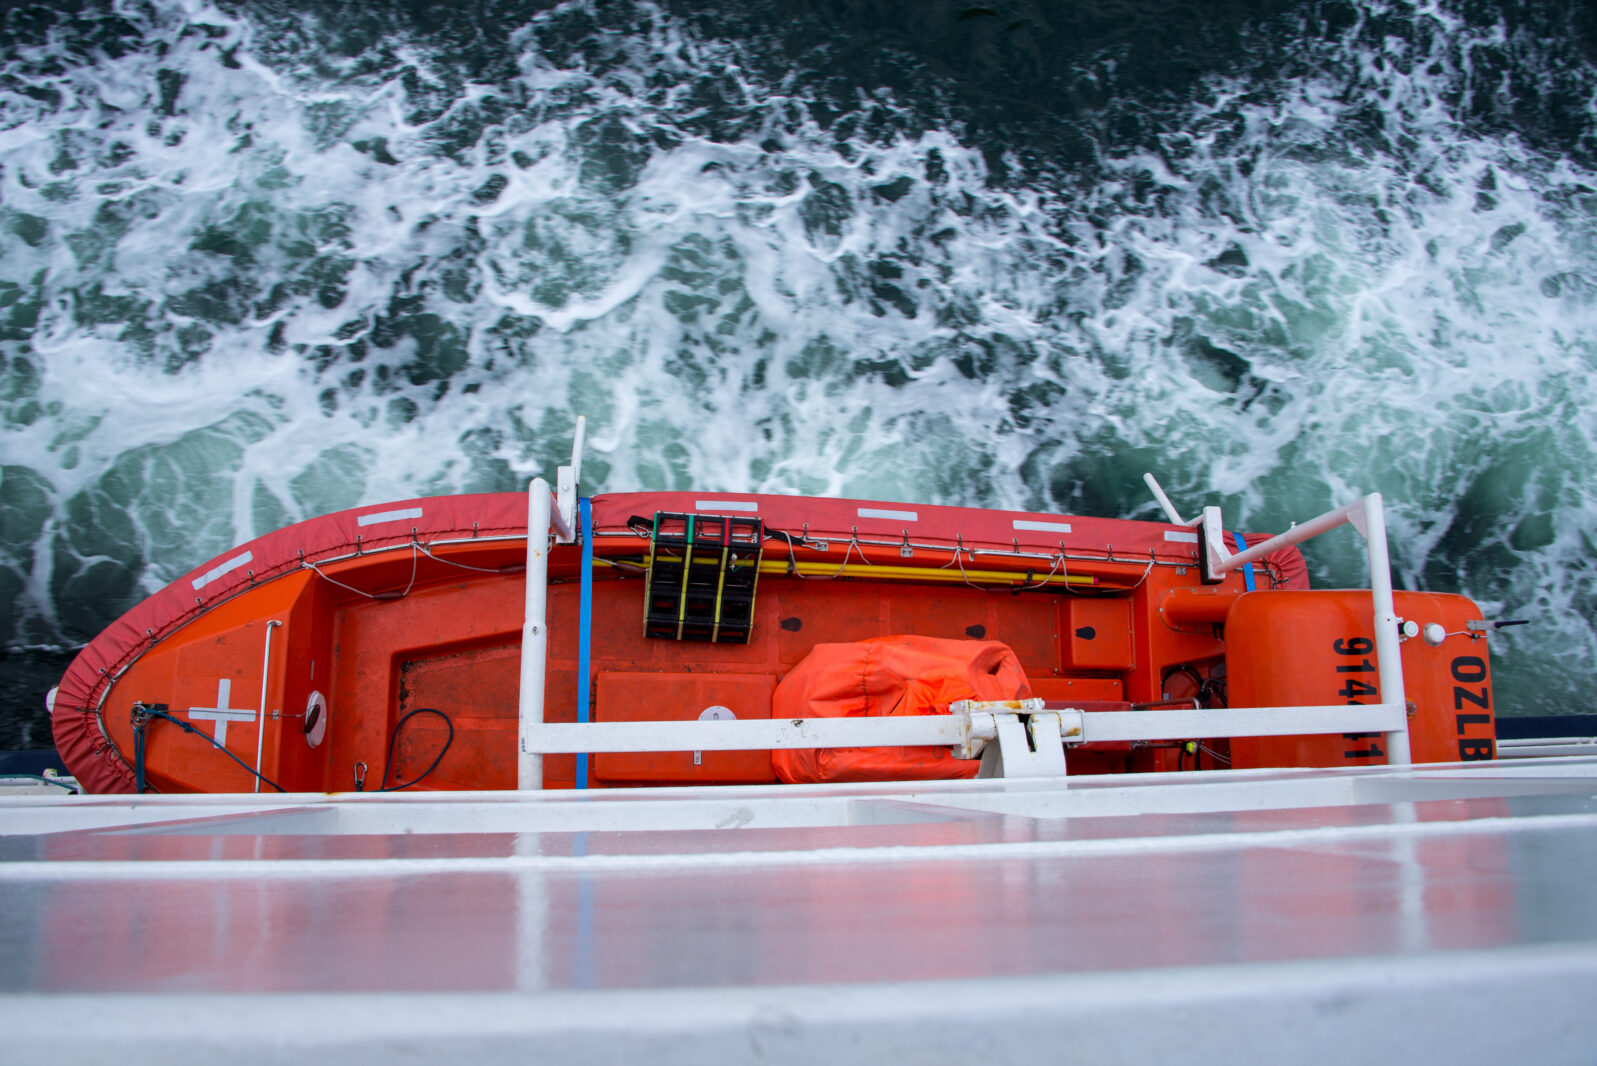 red lifeboat